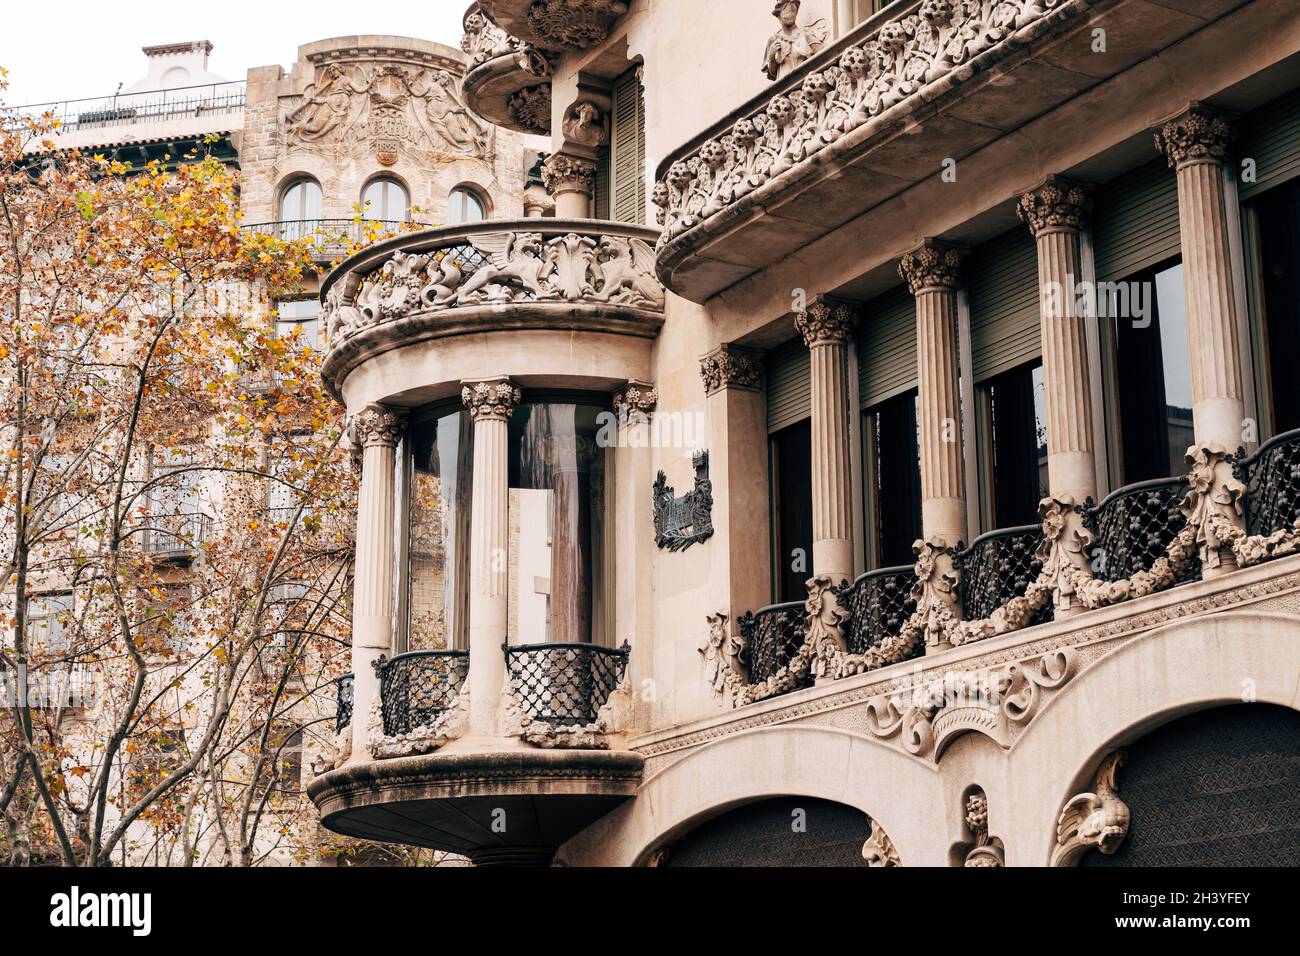 The house of Llieo i Morera is a six-story residential building in Barcelona, a masterpiece of Catalan modernism, one of the mos Stock Photo